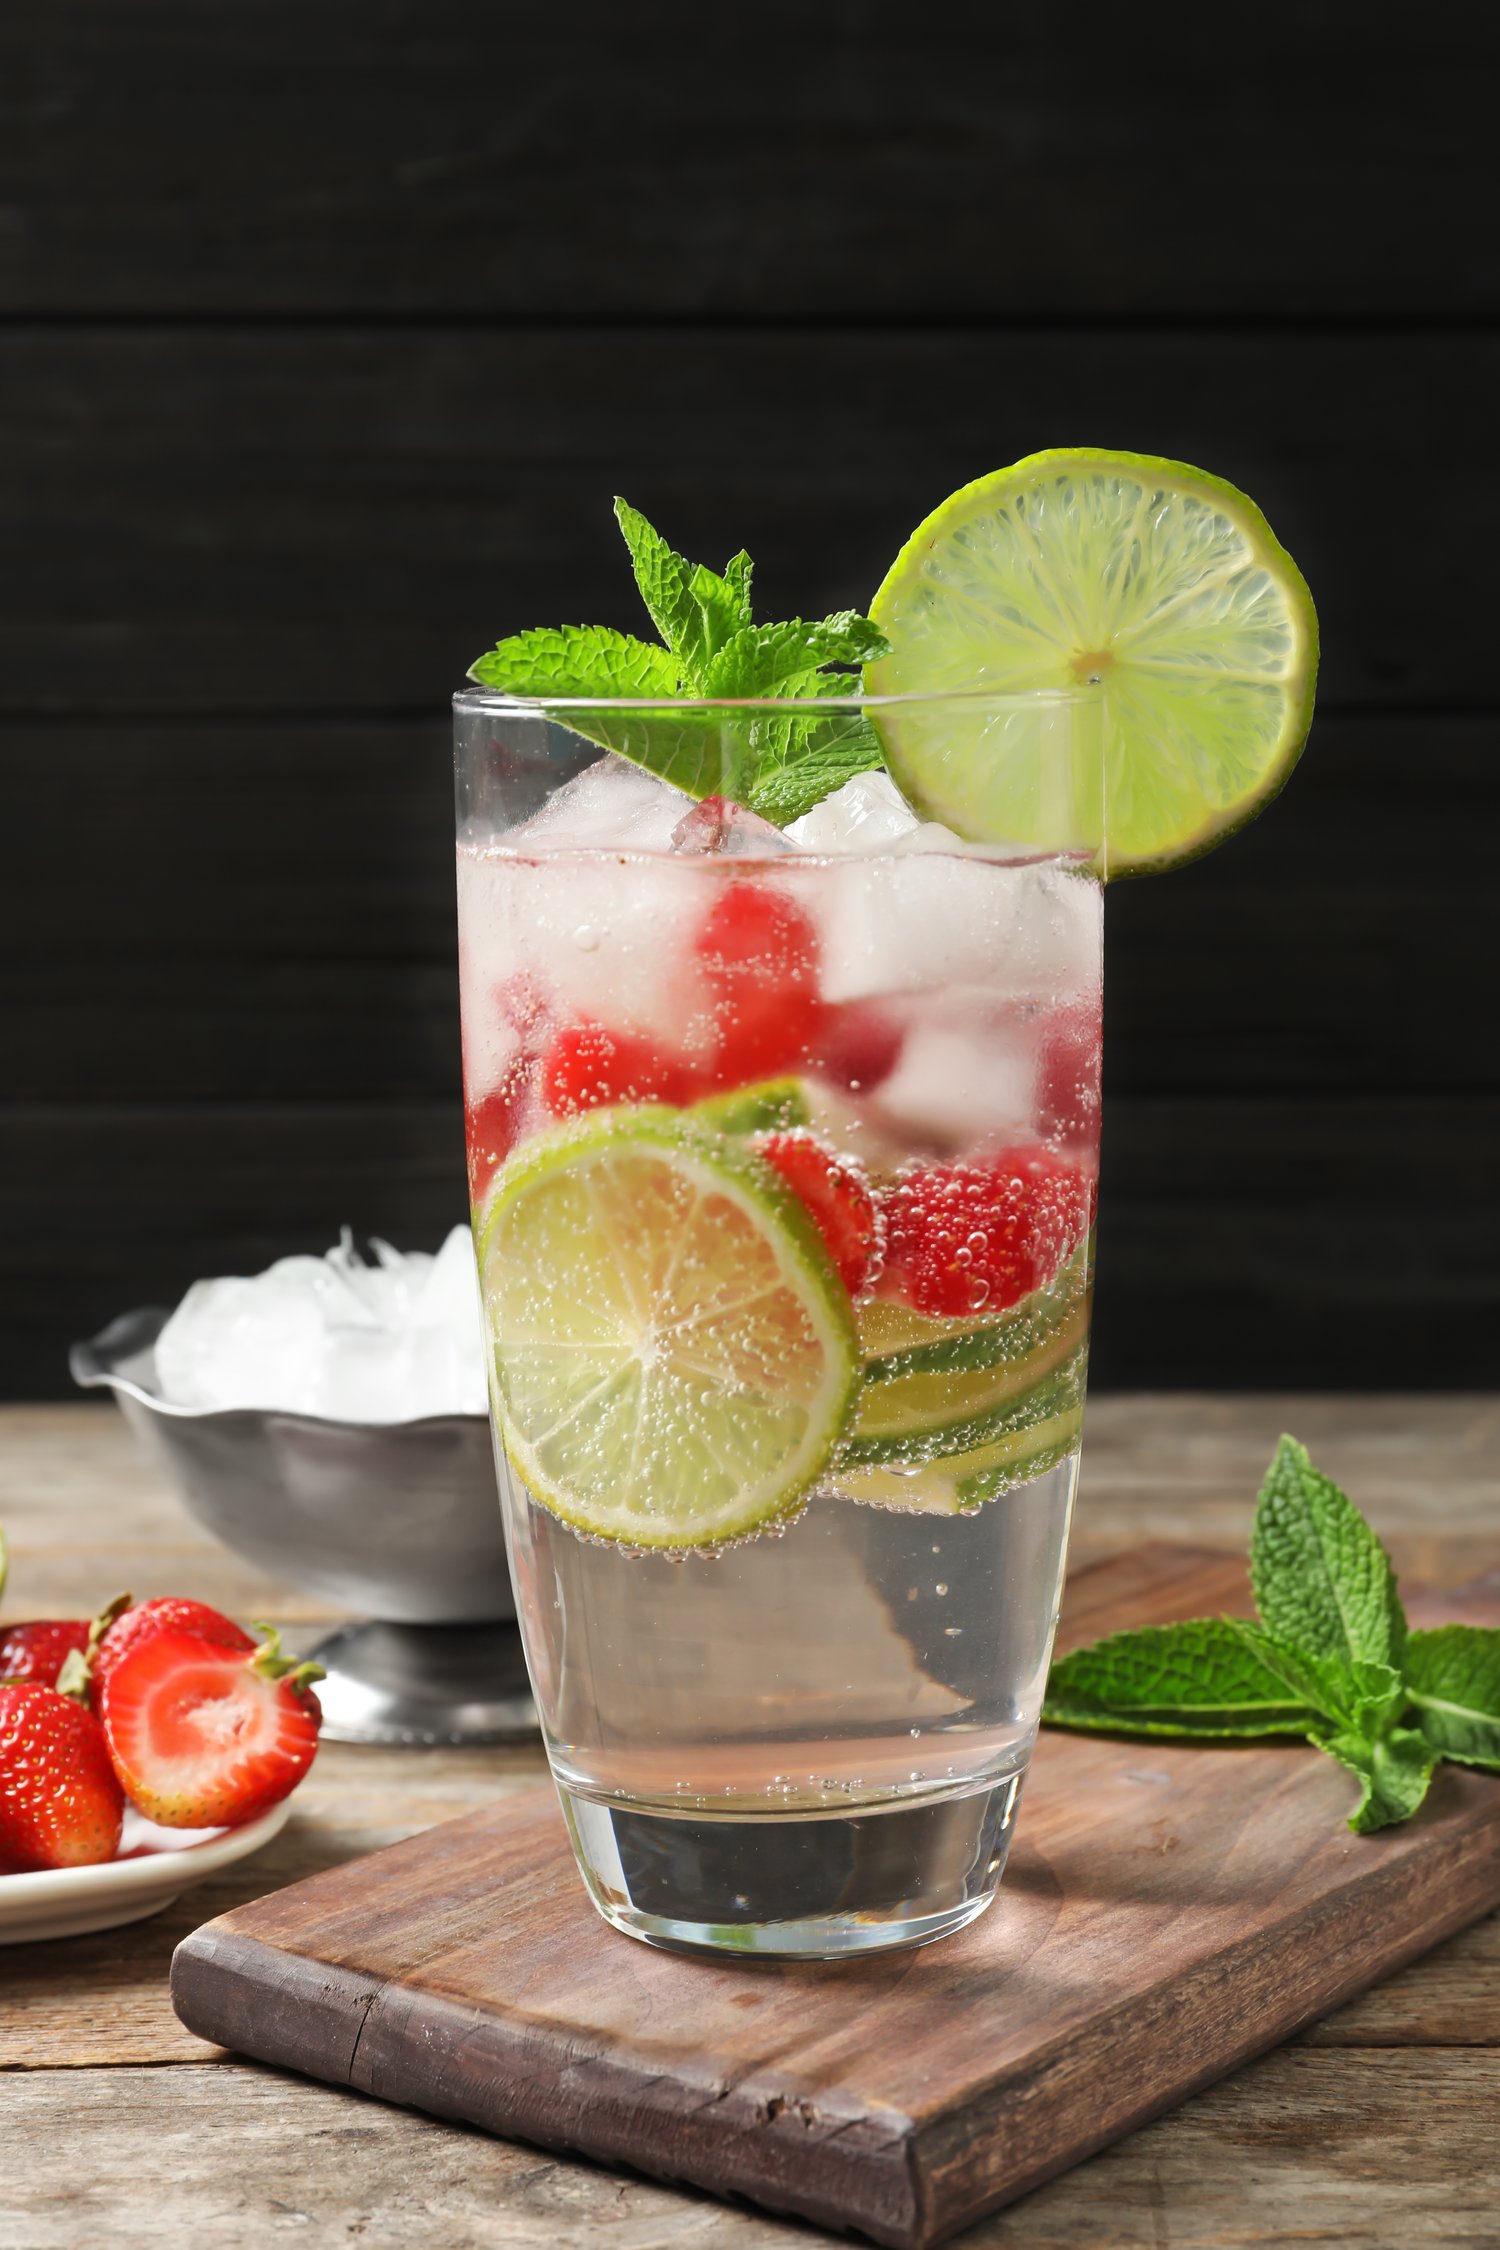 Lemonade: A refreshing and healthy boost for your wellbeing